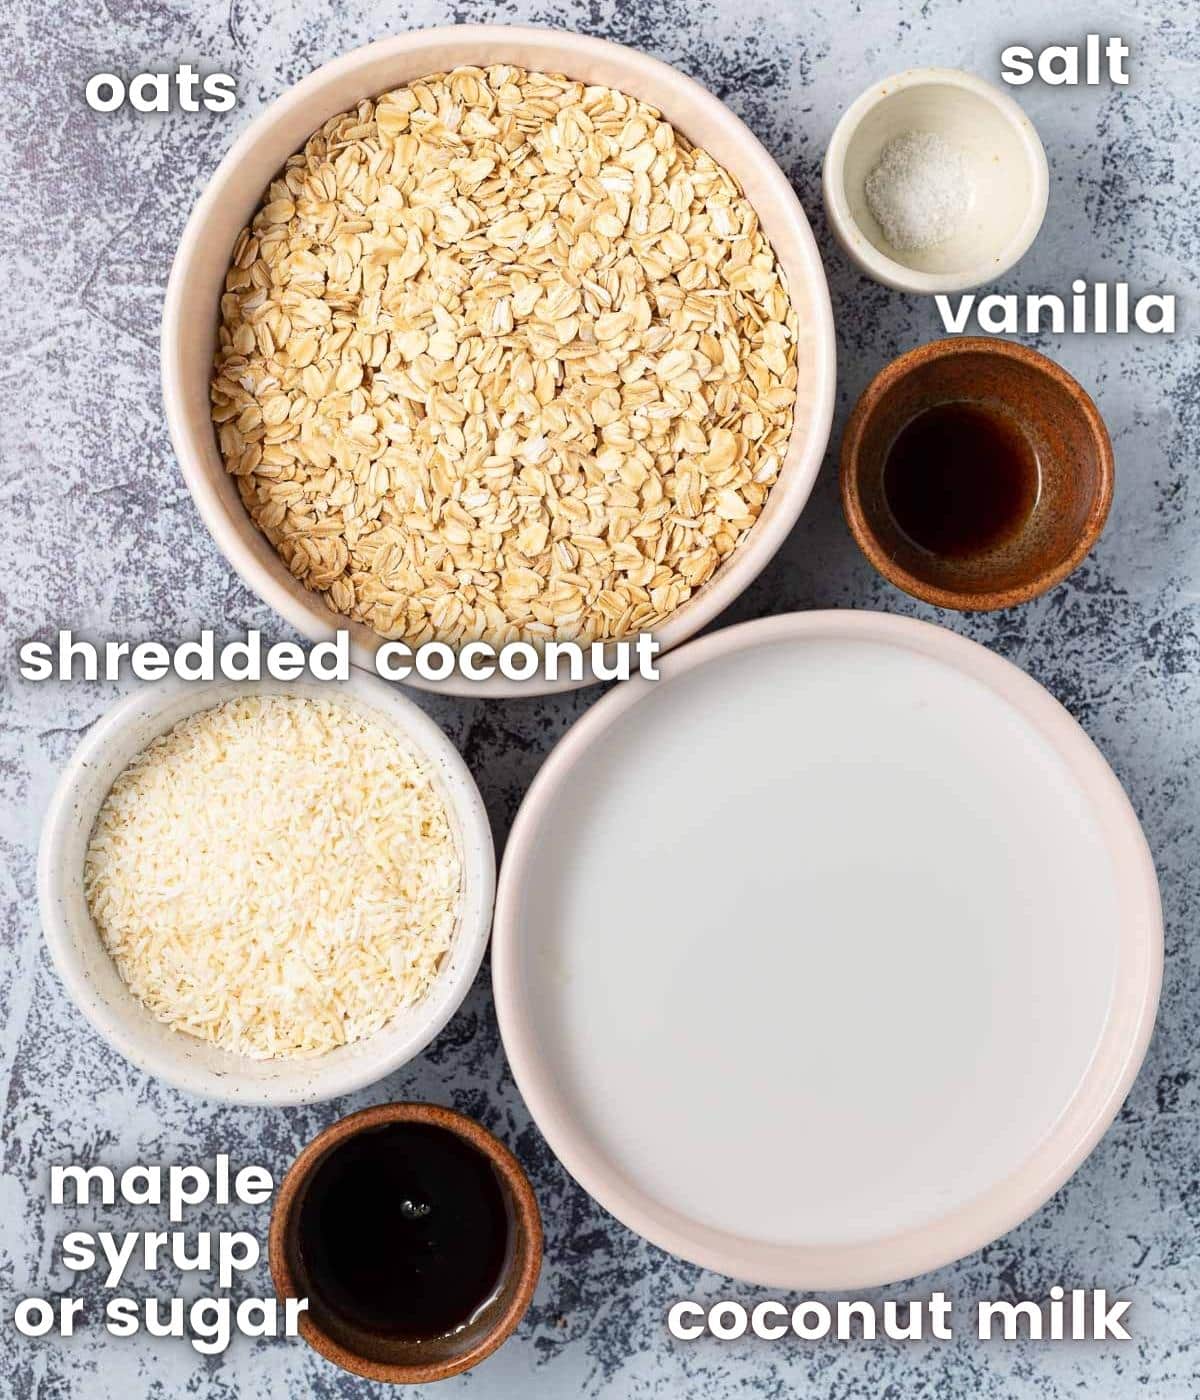 ingredients needed to make coconut milk oatmeal as per the written list